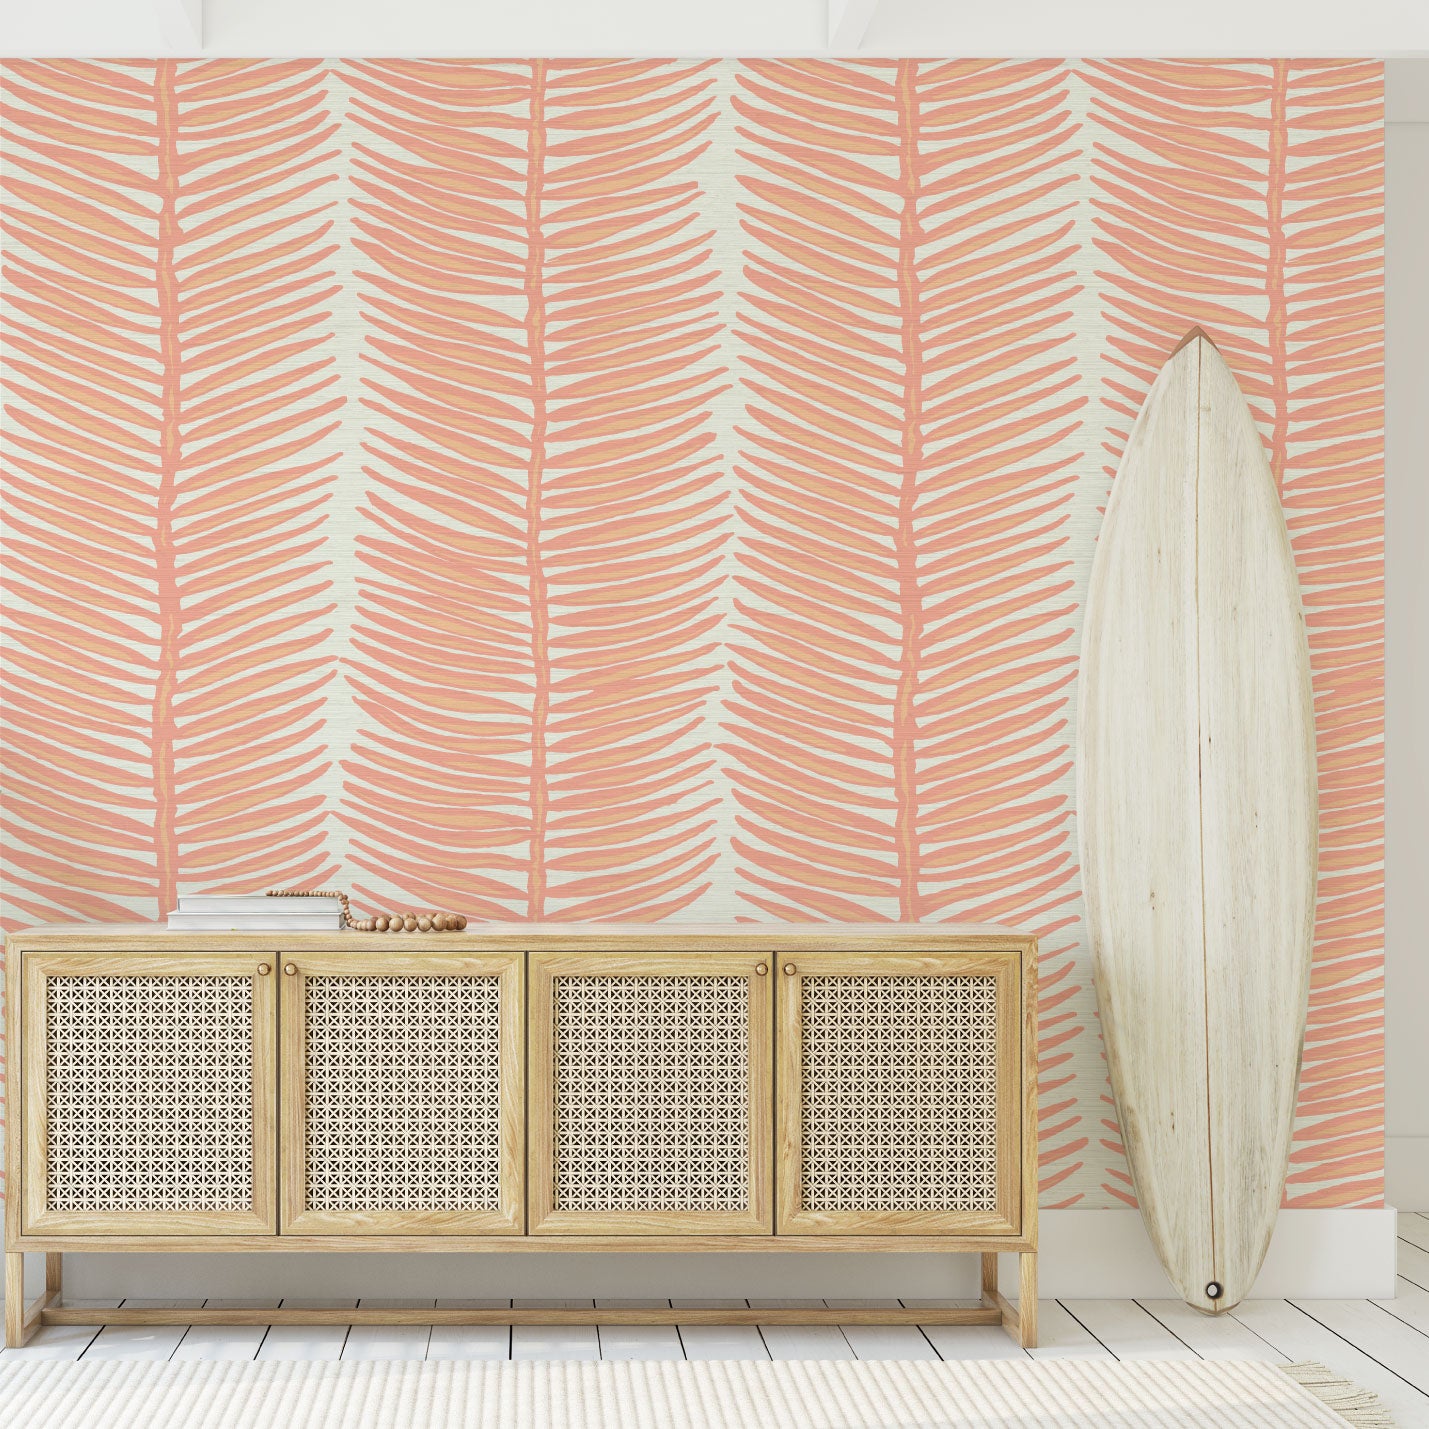 Grasscloth wallpaper Natural Textured Eco-Friendly Non-toxic High-quality Sustainable Interior Design Bold Custom Tailor-made Retro chic Tropical Jungle Coastal Garden Seaside Seashore Waterfront Vacation home styling Retreat Relaxed beach vibes Beach cottage Shoreline Oceanfront Nautical Cabana preppy palm fern leaf vertical stripe  coral orange tangerine pink entrance surf credenza foyer